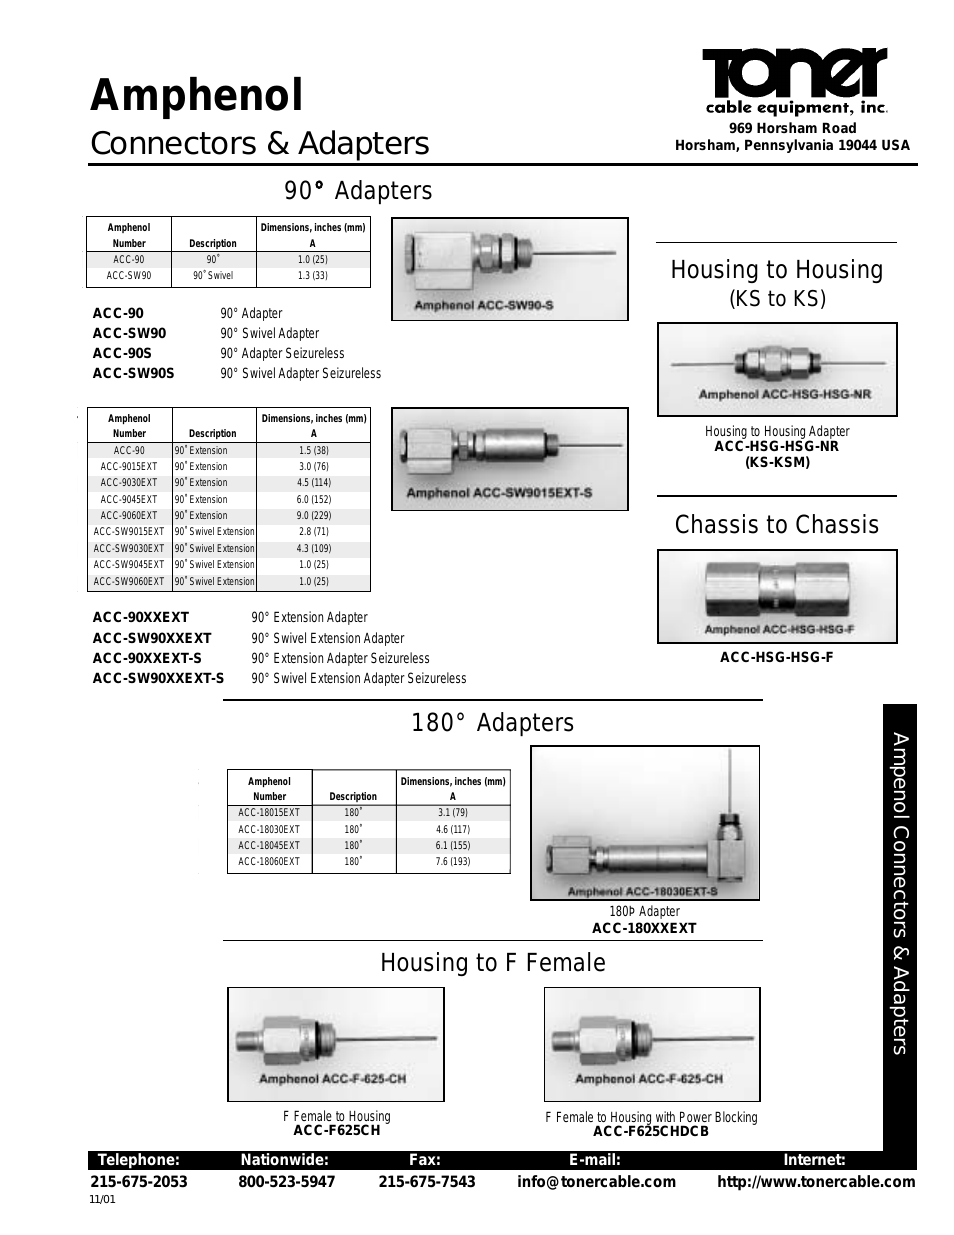 ACC-18015EXT 180° Adapters